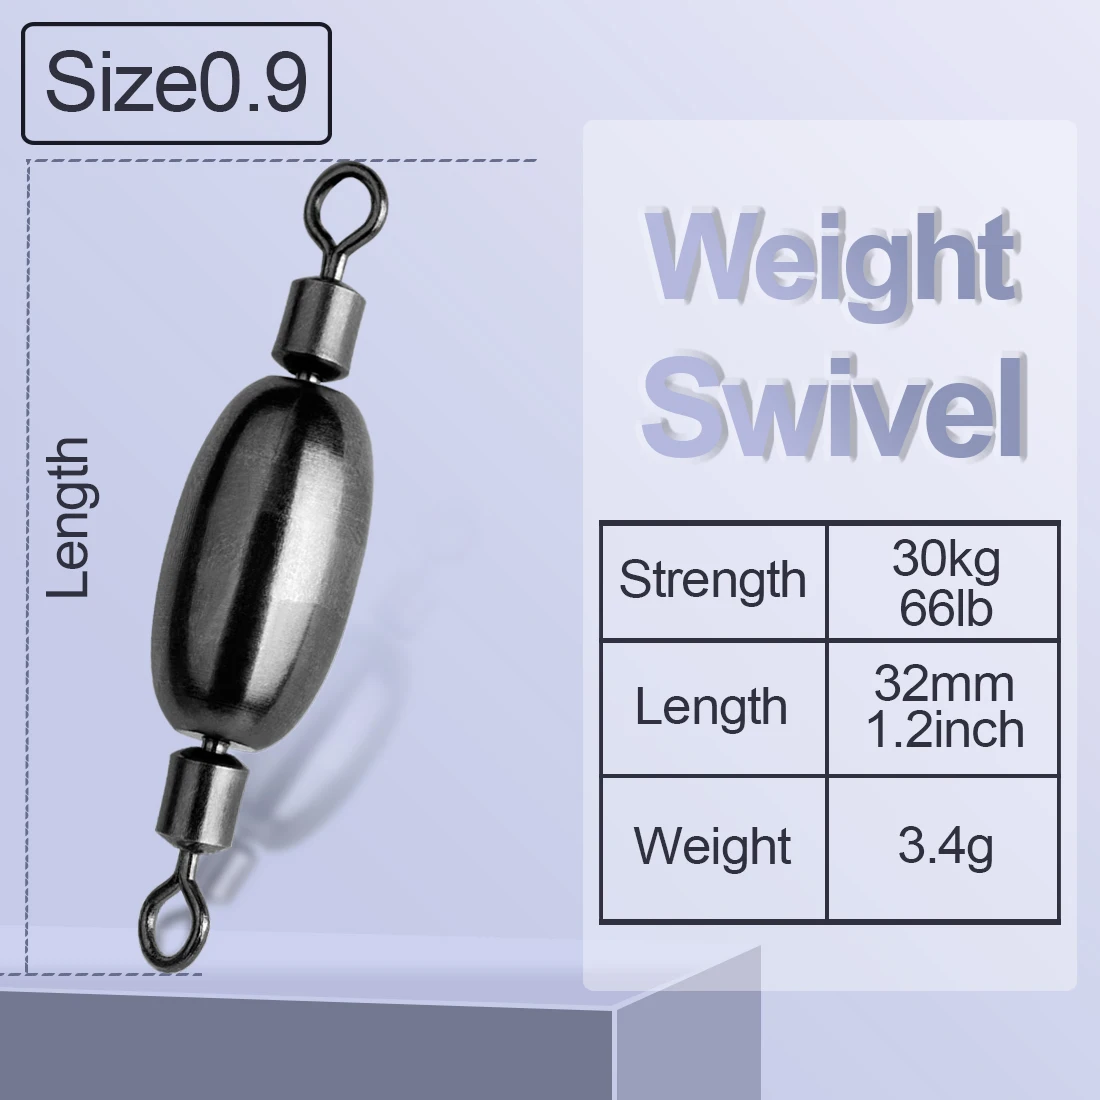 https://ae01.alicdn.com/kf/S87cee84c0c814e92a5f0aab404cd3e366/FishTrip-Two-In-One-Fishing-Weight-Sinkers-with-Rolling-Swivel-Stainless-Steel-for-Drop-Bottom-Fishing.jpg